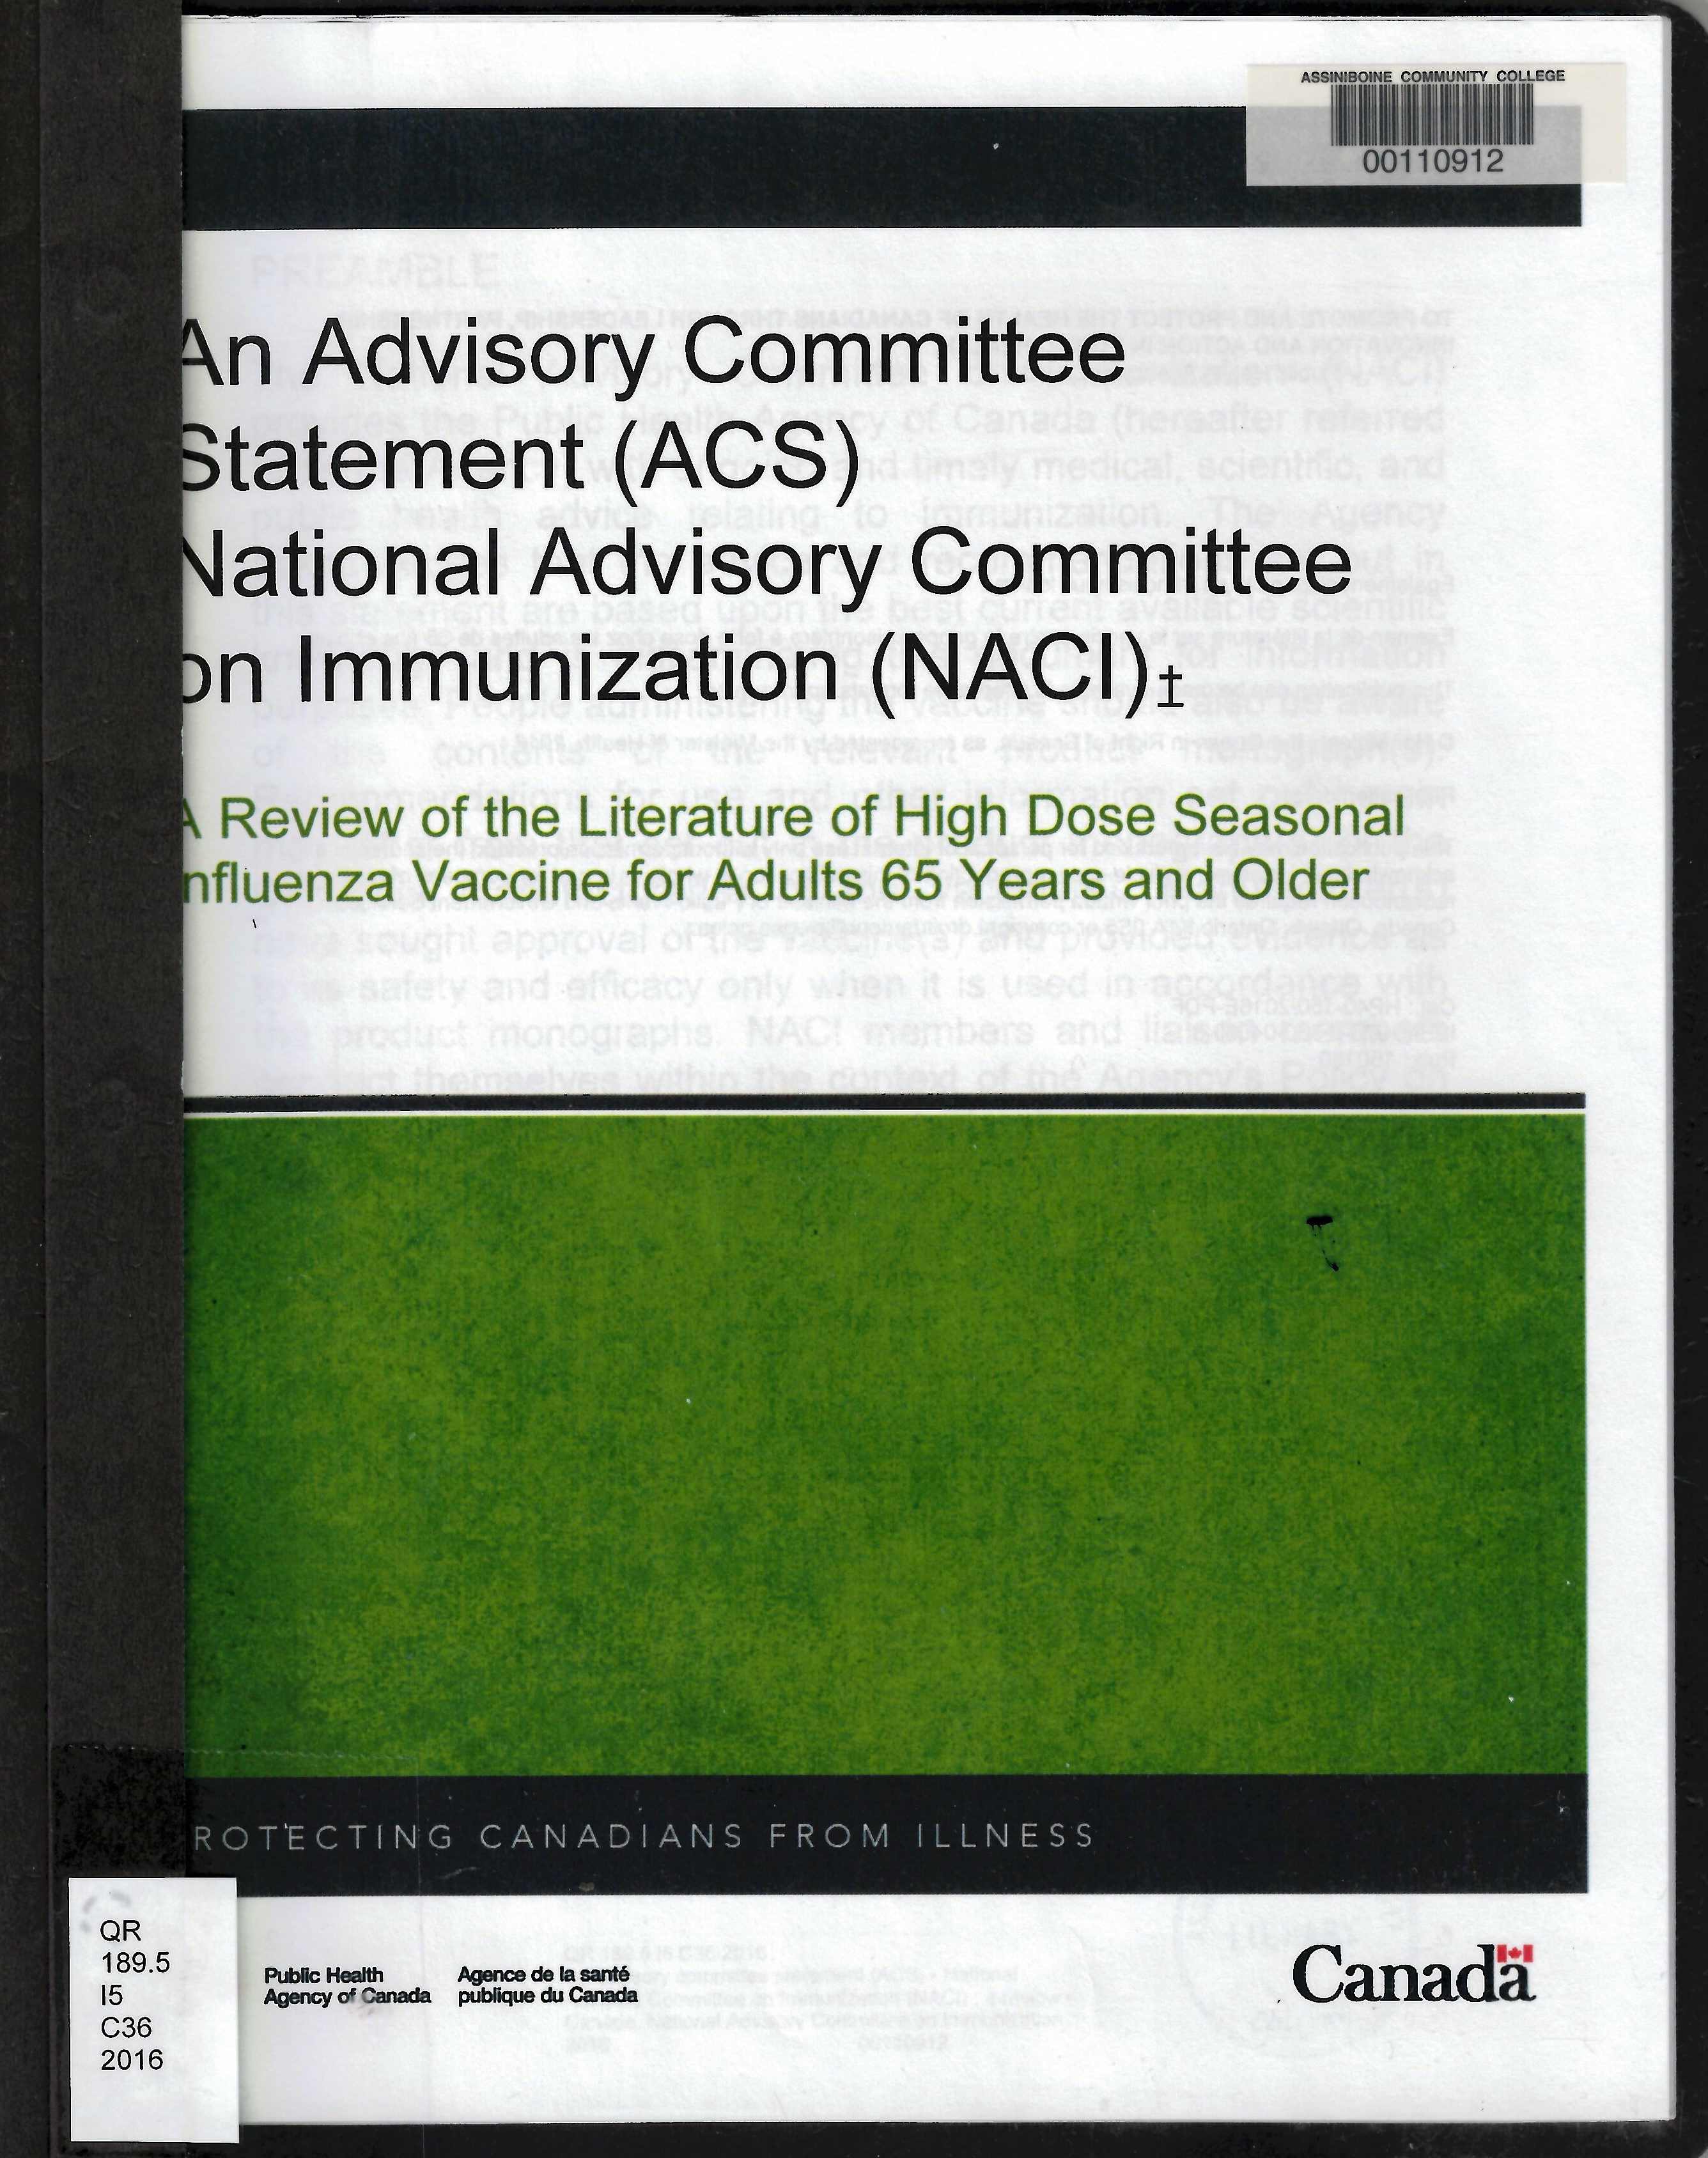 An advisory committee statement (ACS) - National Advisory Committee on Immunization (NACI) : a review of the literature of high dose seasonal influenze vaccine for adults 65 years and older